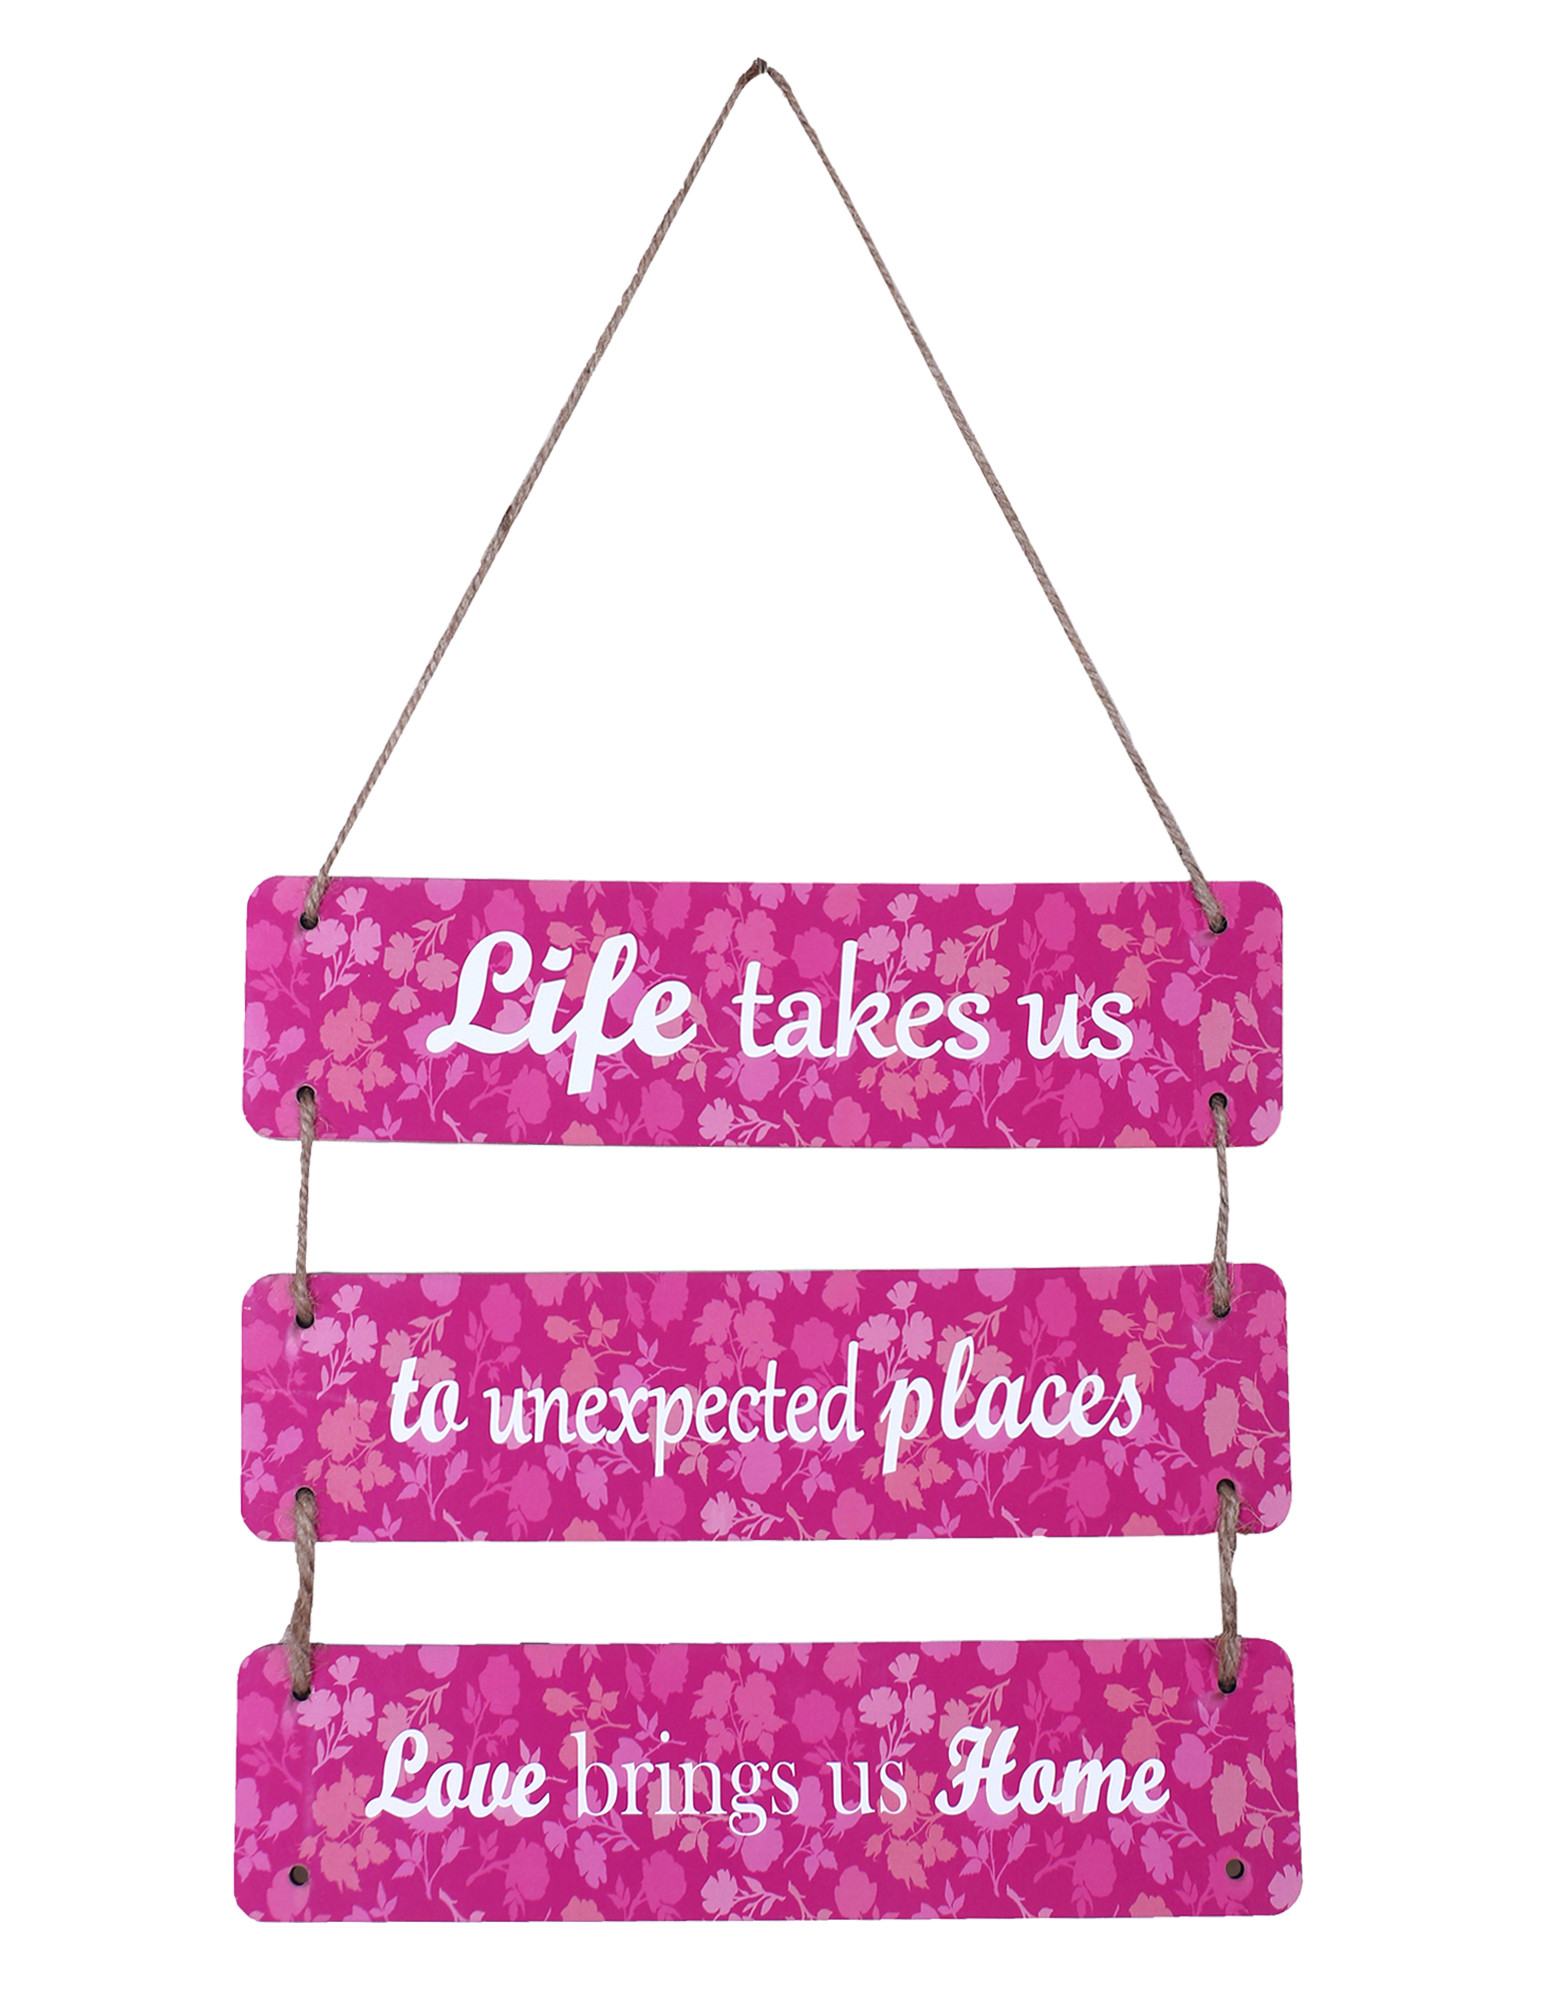 Kuber Industries Wooden 3 Layered Motivational & Meaningfull Wall Hanging Quotes For Home,Office Decoration (Pink)